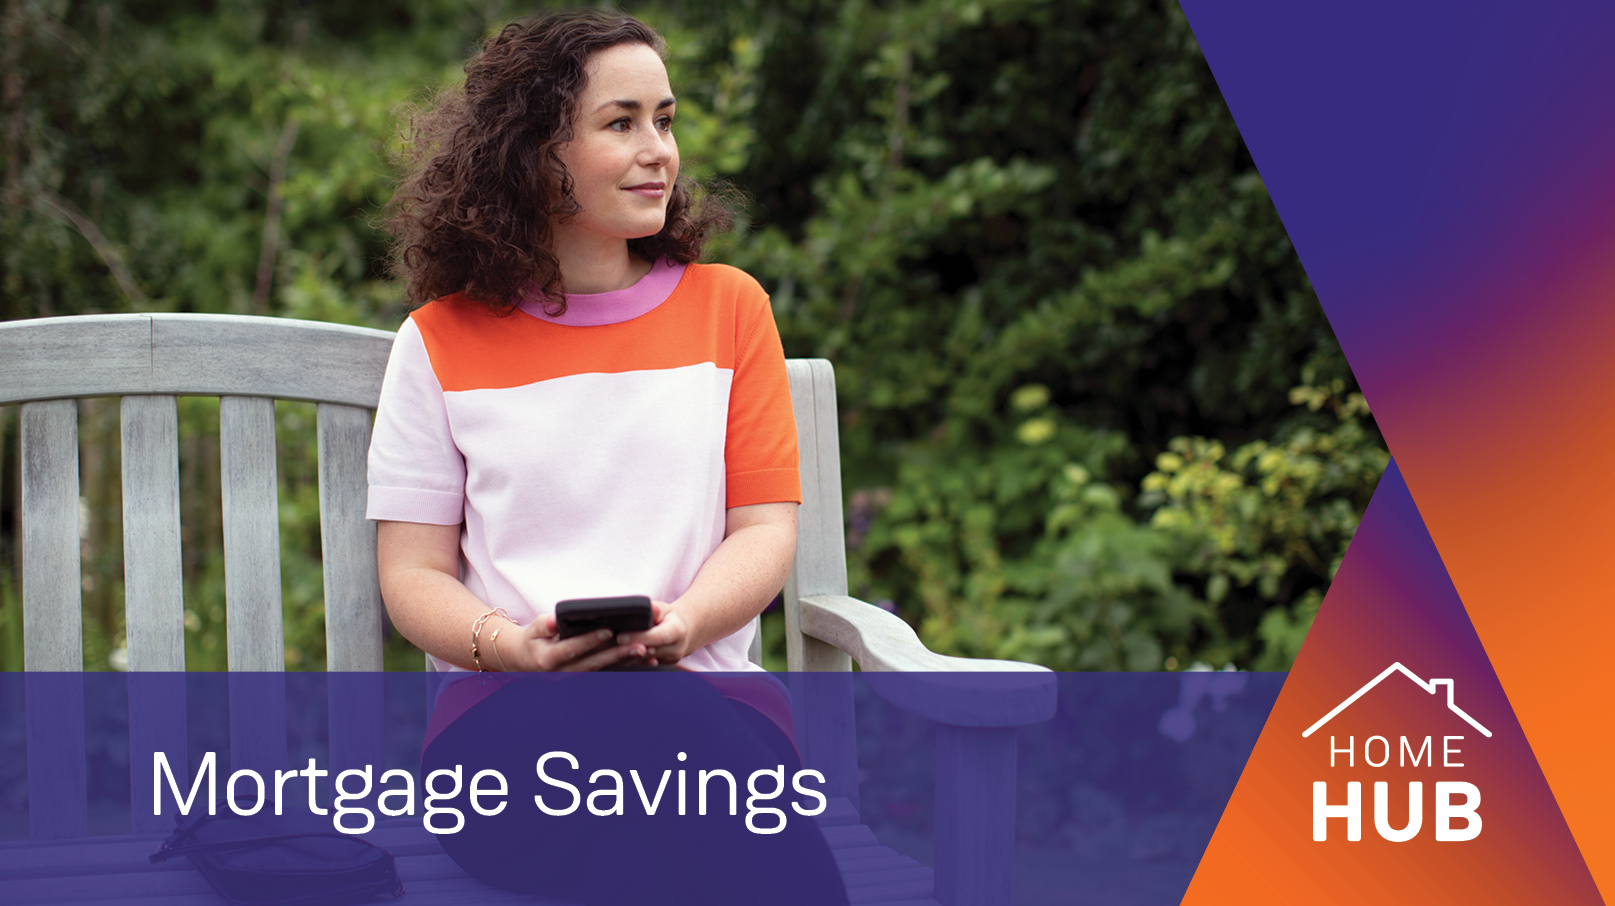 Mortgage Savings: Our top tips on saving for your dream home